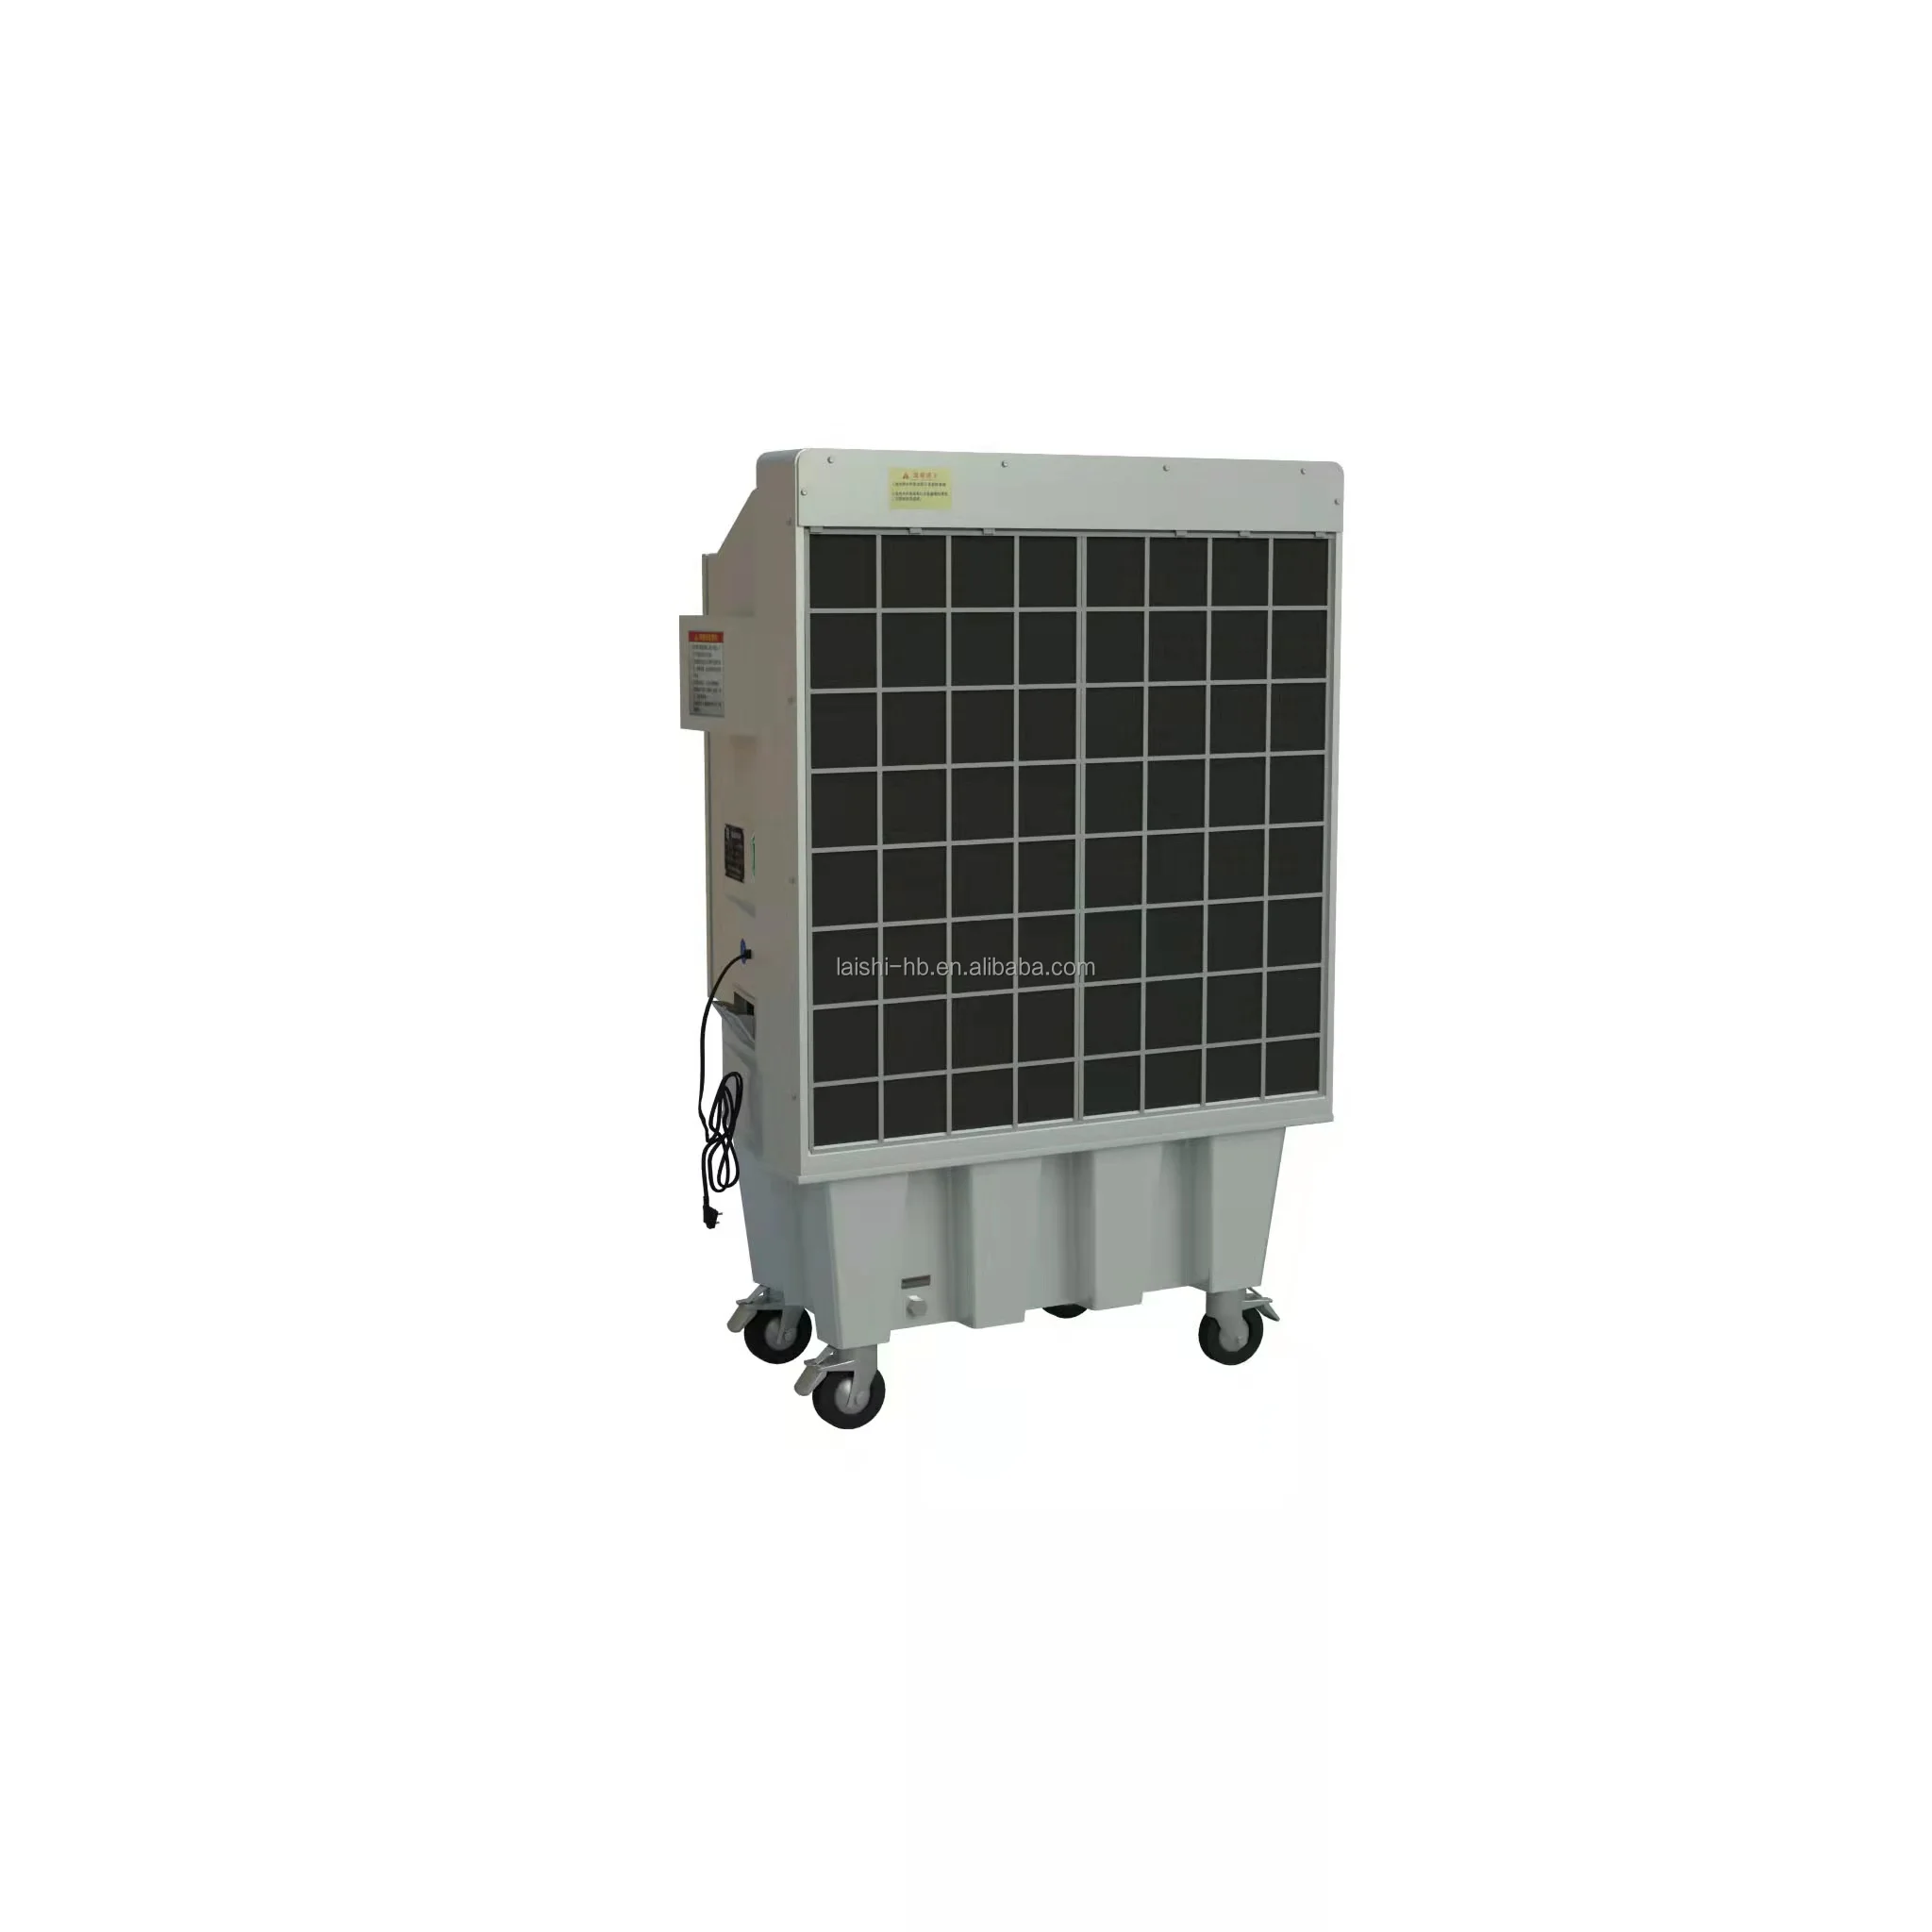 KTY 23K CE approved Hot Sale Best Quality  swamp Conditioner  large volume Industrial evaporative cooler box